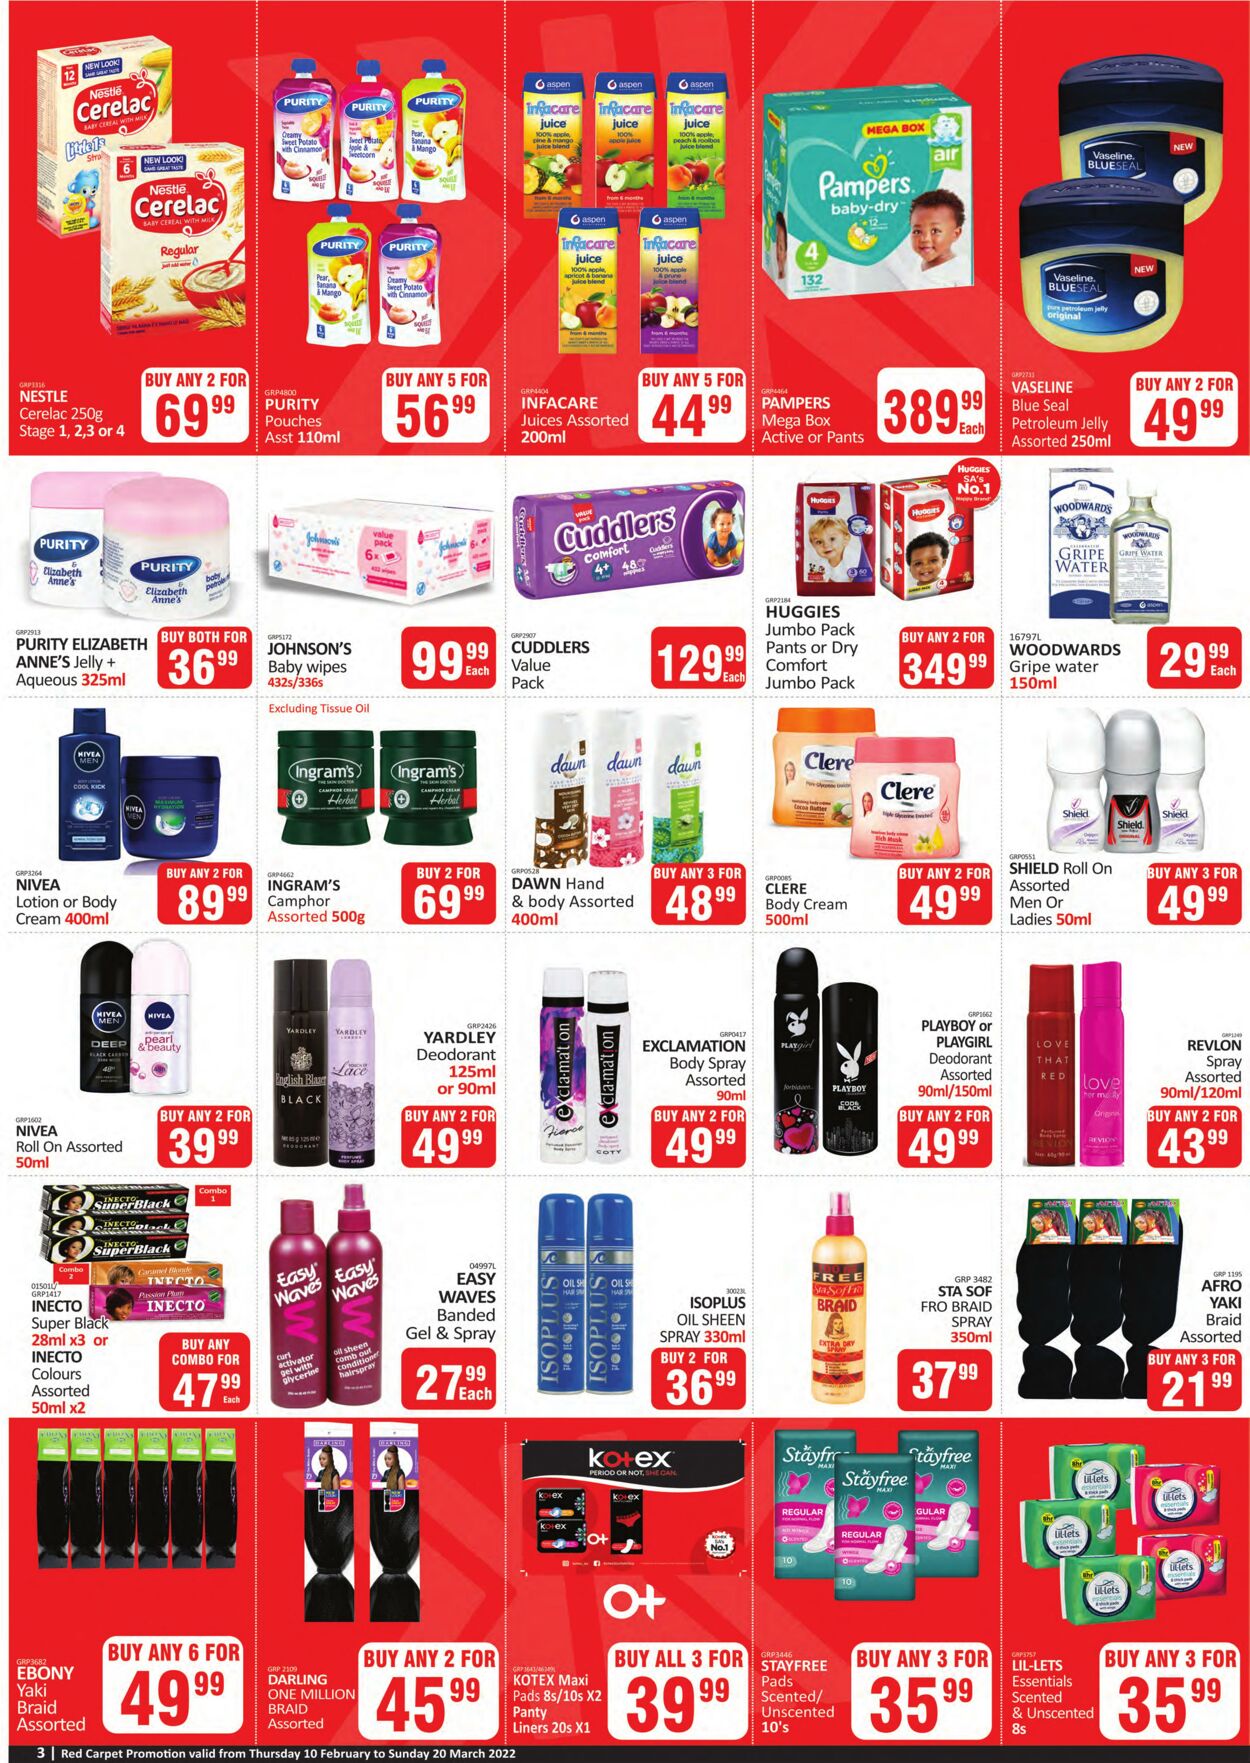 Kit Kat Cash and Carry Promotional Leaflet - Valid from 10.02 to 20.03 ...